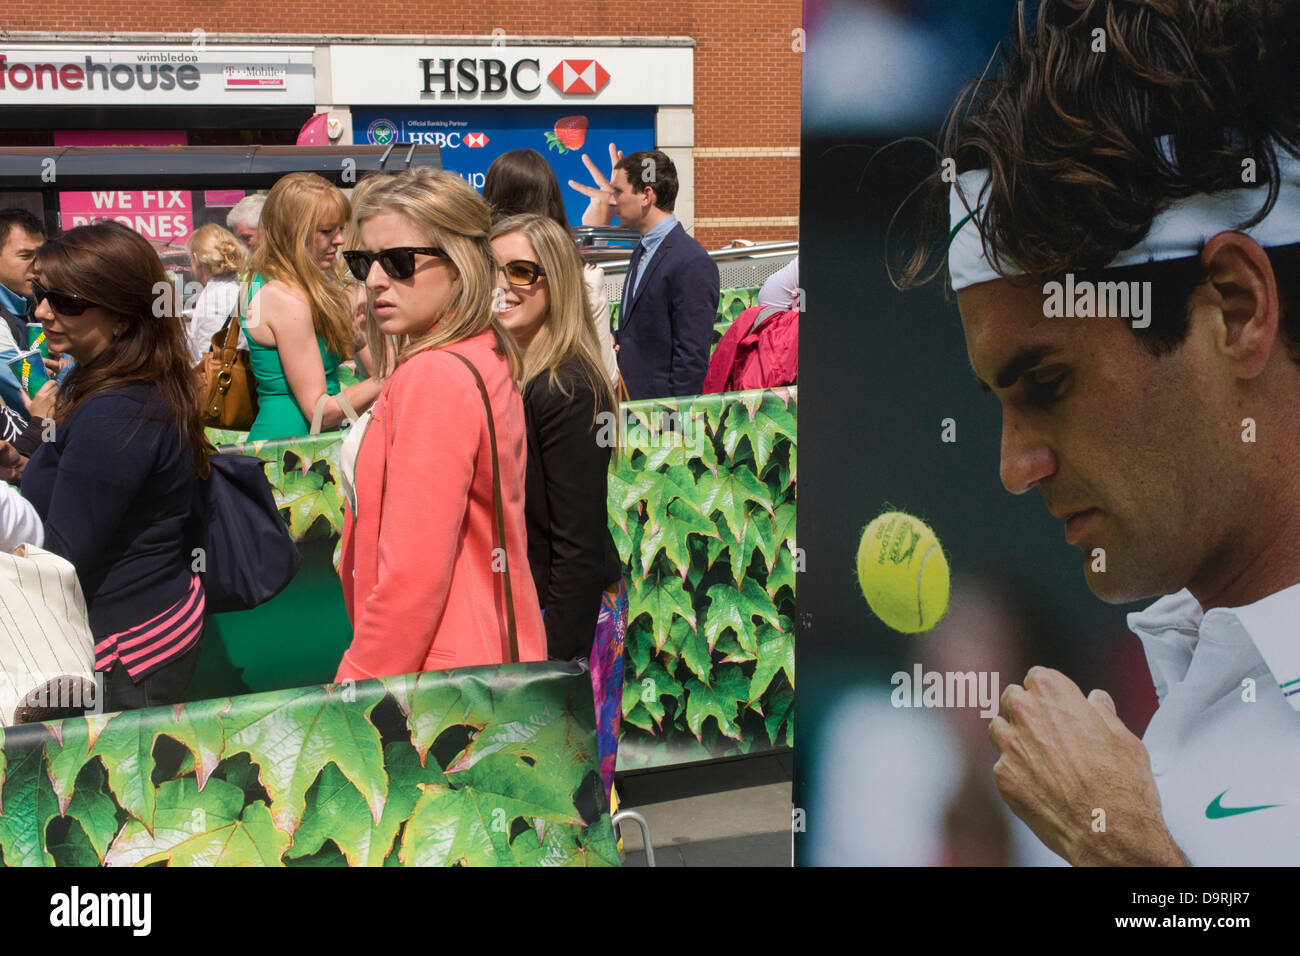 Wimbledon, England, 25th June 2013 - Day 2 of the annual lawn tennis championships and spectators queue for taxies be a poster of past Mens' champion Roger Federer outside the mainline and underground (subway) station in the south London suburb. The Wimbledon Championships, the oldest tennis tournament in the world, have been held at the nearby All England Club since 1877. Stock Photo